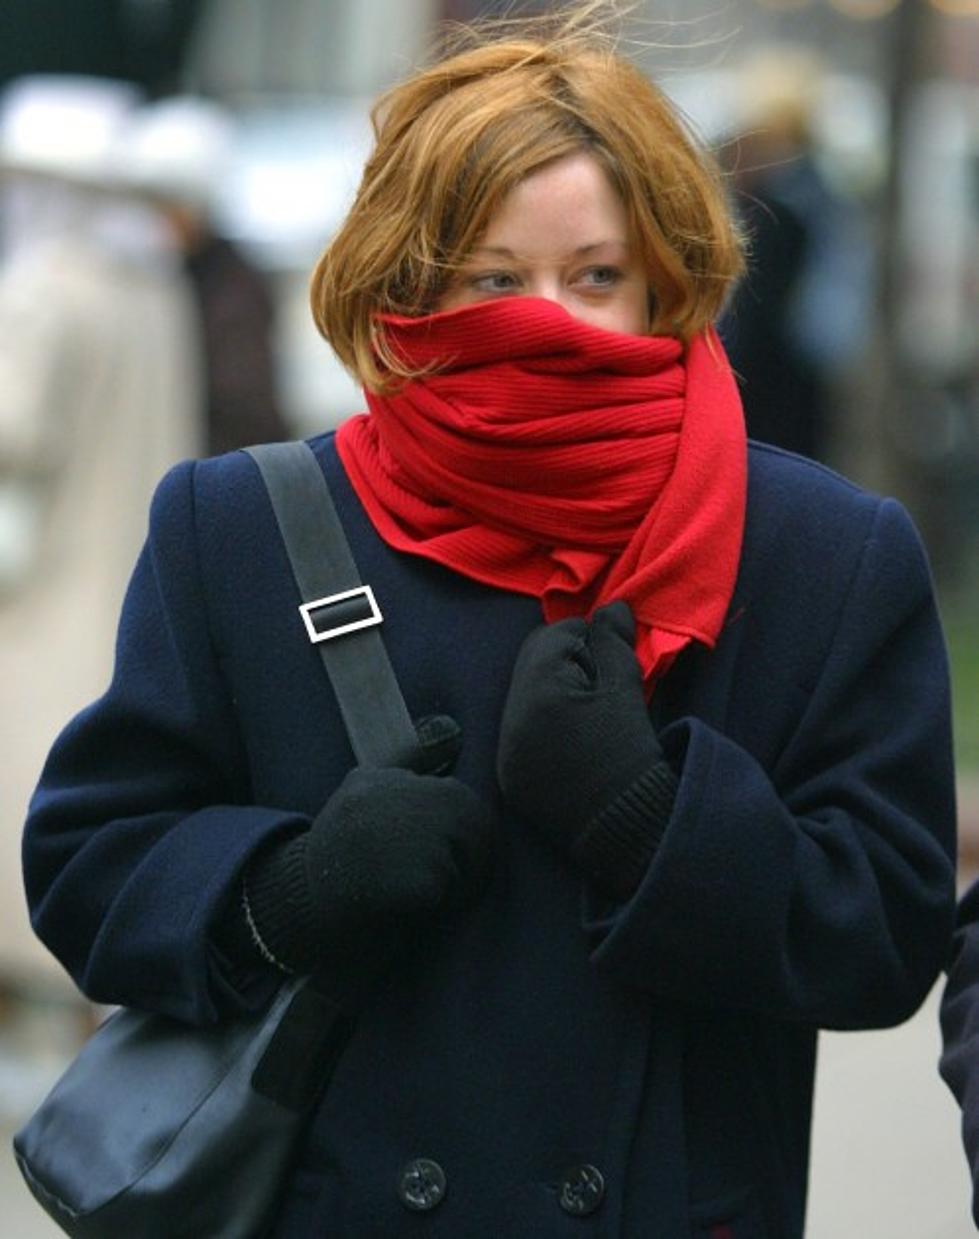 Scientifically Proven Ways to Stay Warm